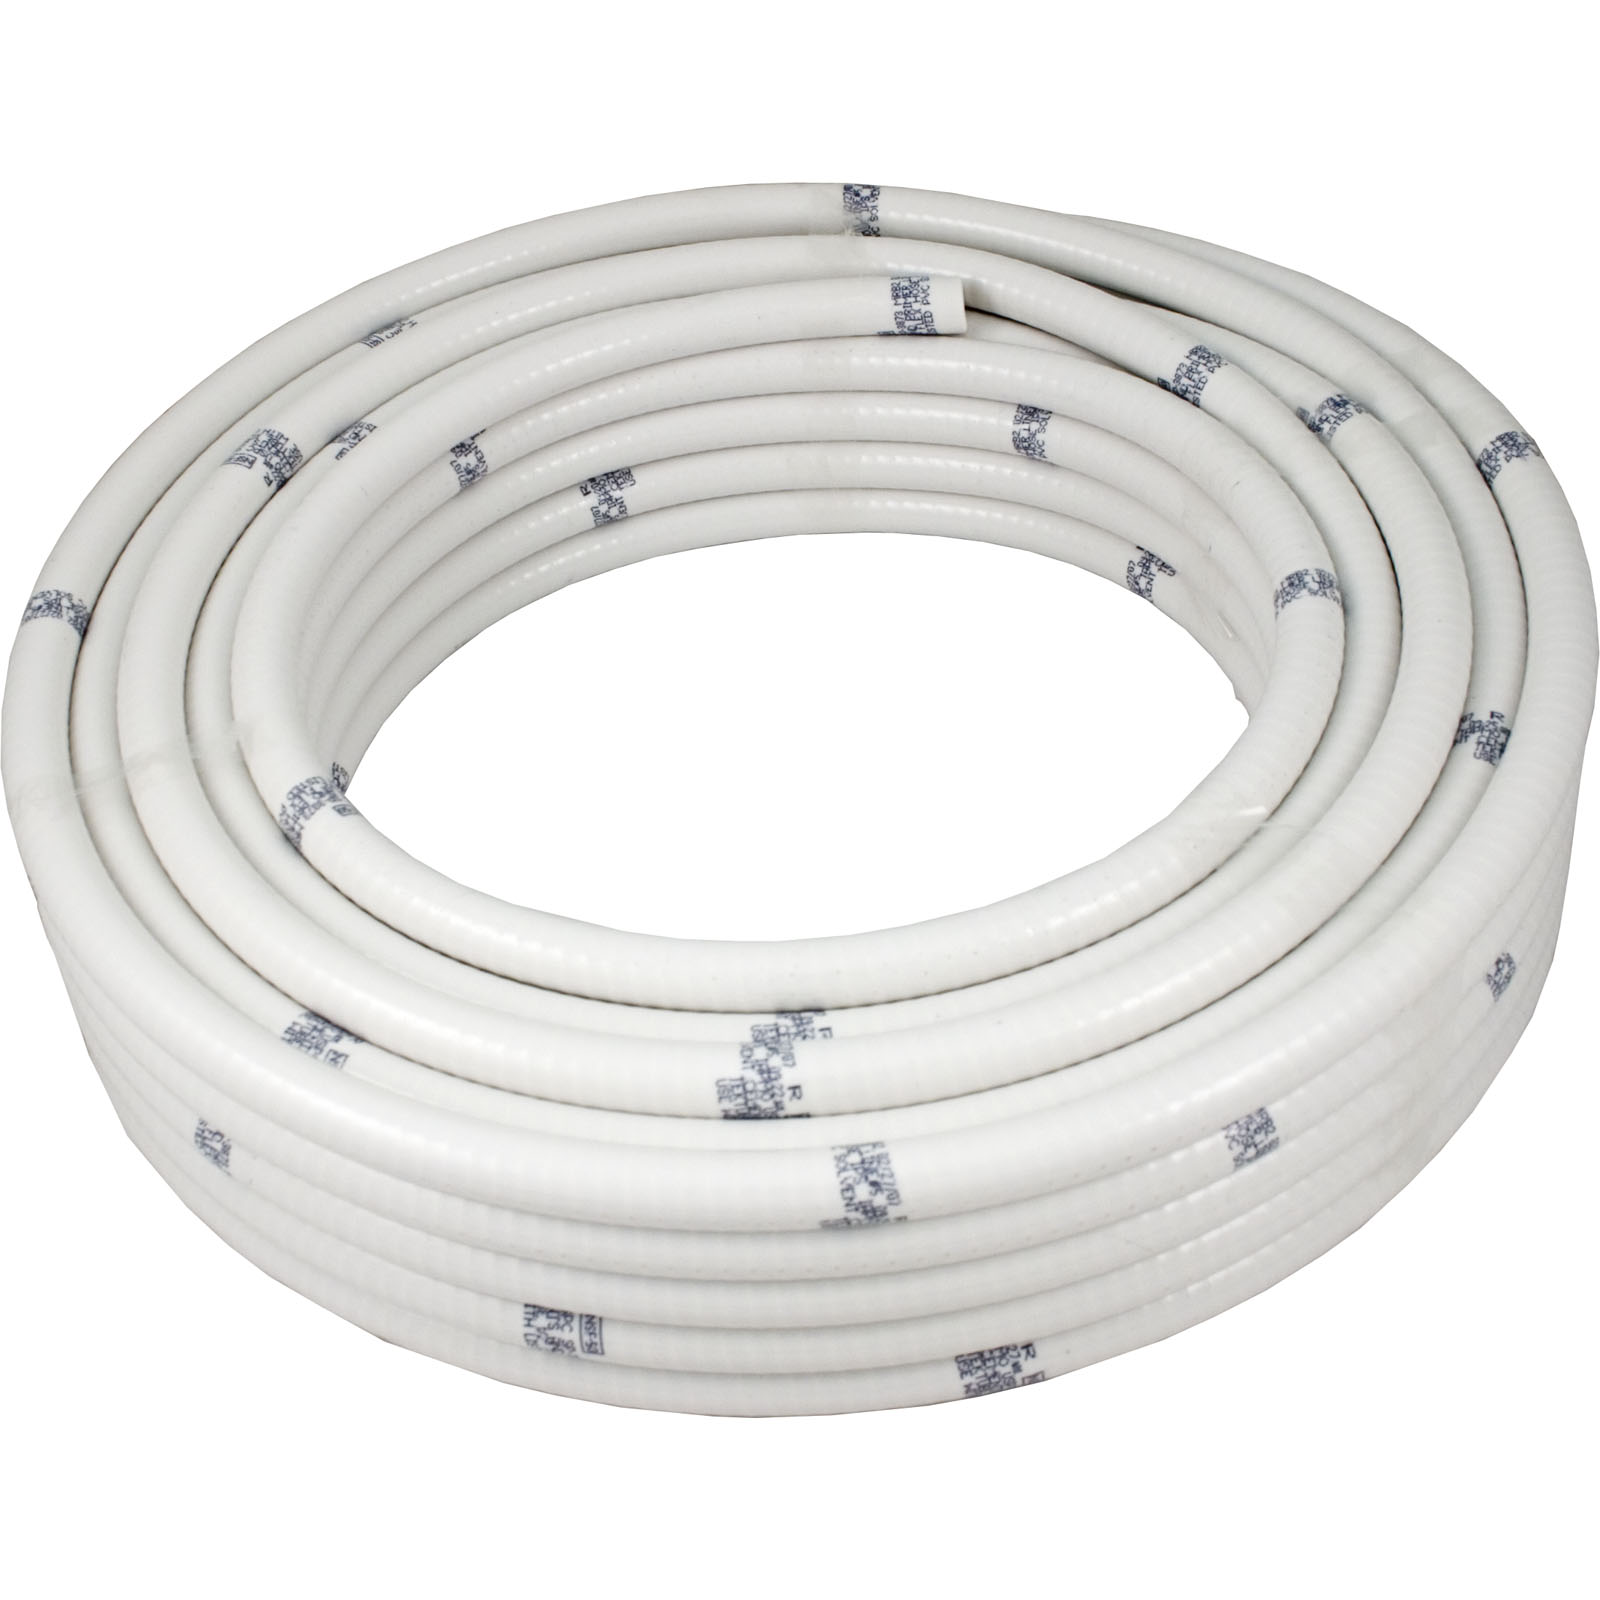 Picture of Flexible PVC Pipe, 1/2" x 100 foot